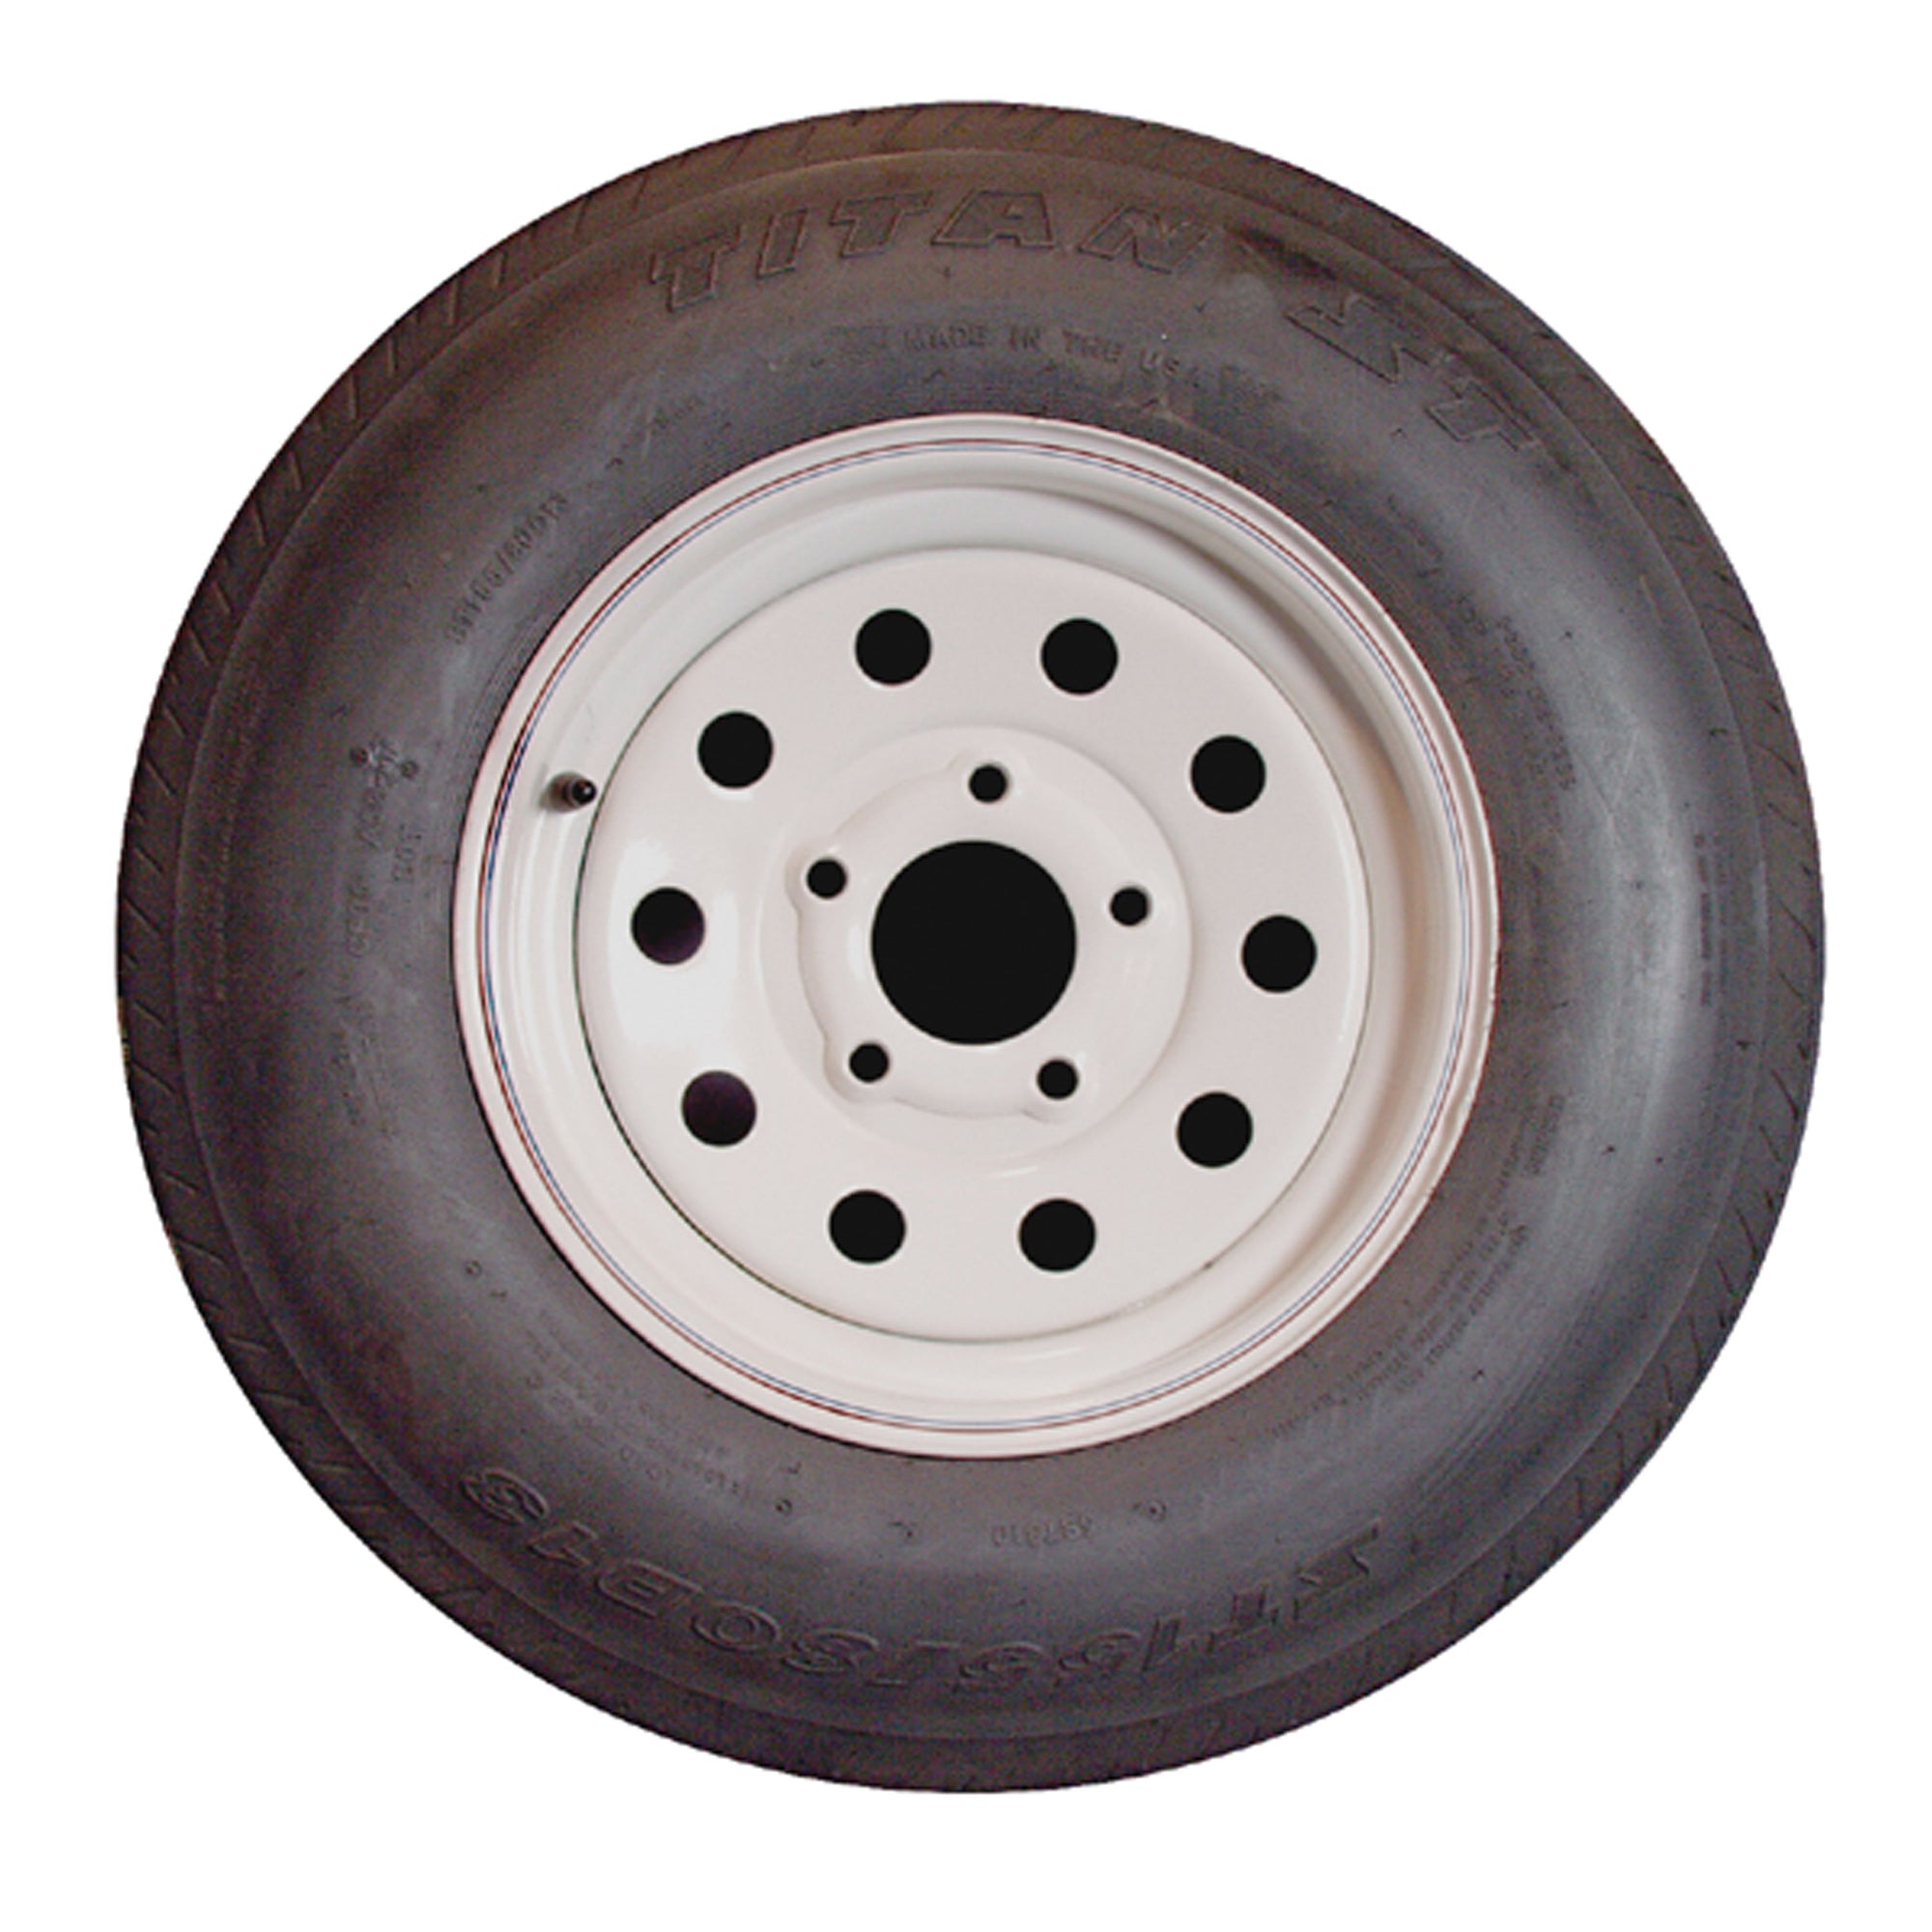 Americana Tire and Wheel 3H482 Economy Bias Tire and Wheel 205/65-10E D/5-Hole - Painted Silver Modular Rim